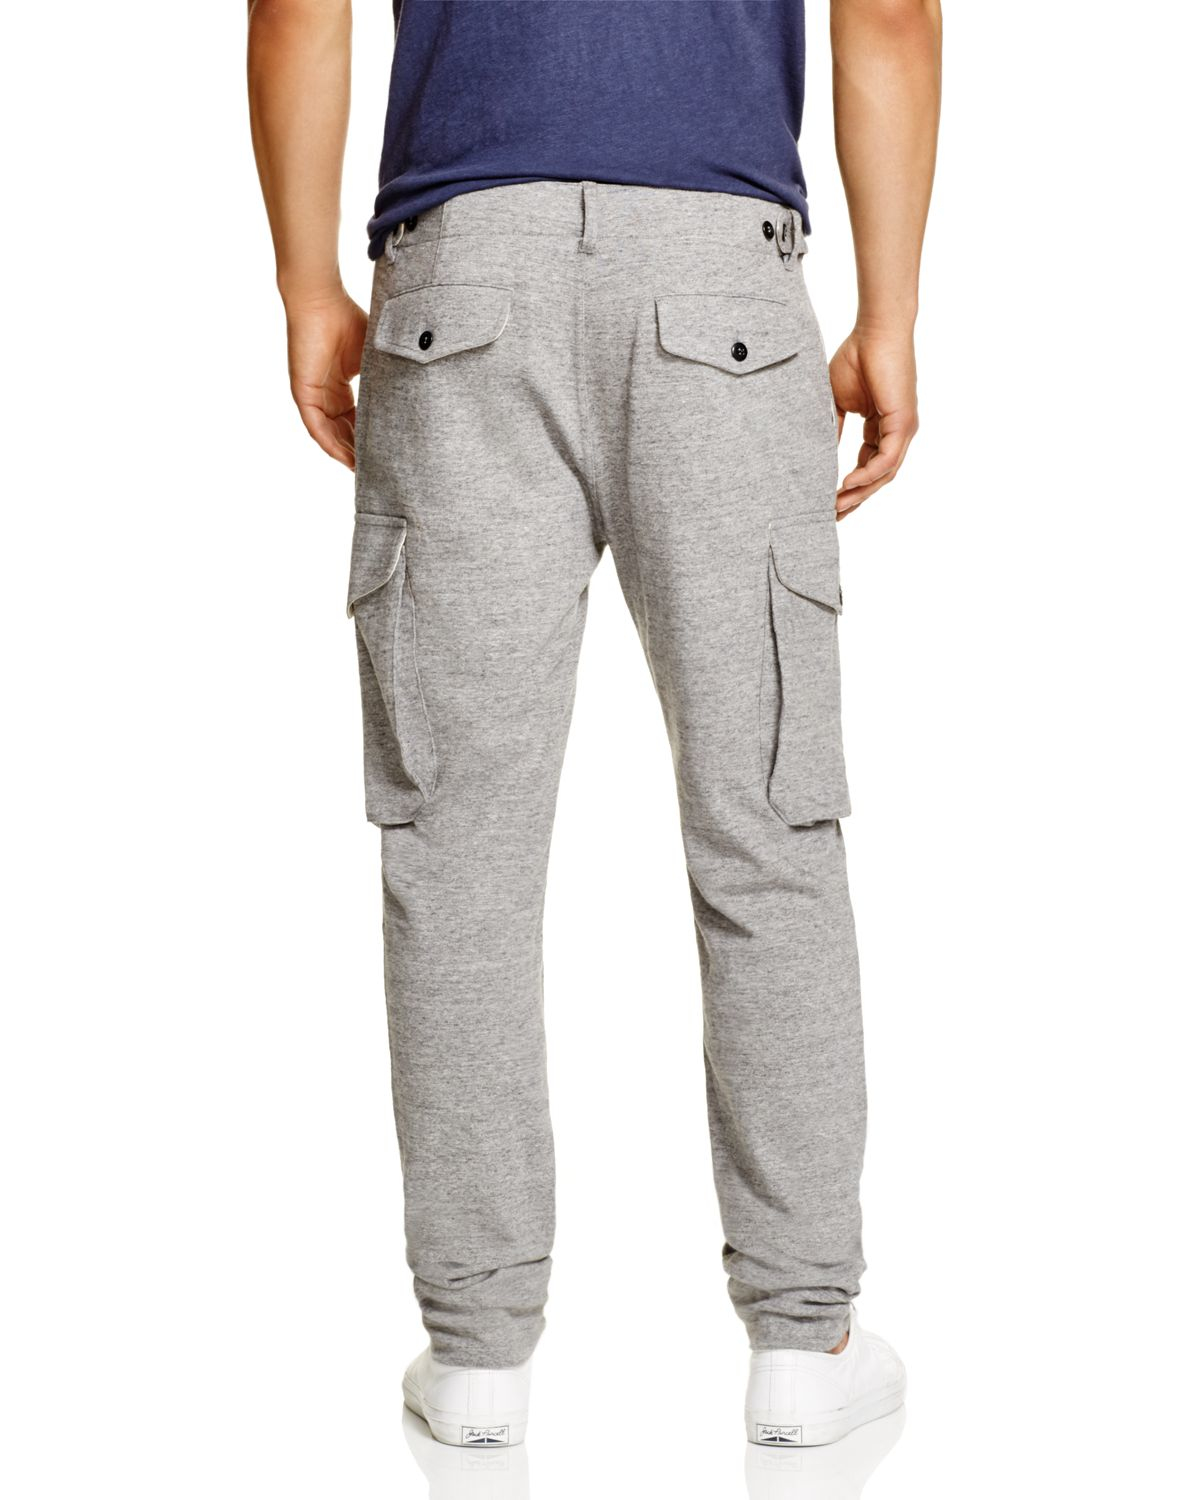 Cargo Jogger Pants in Heather Grey 